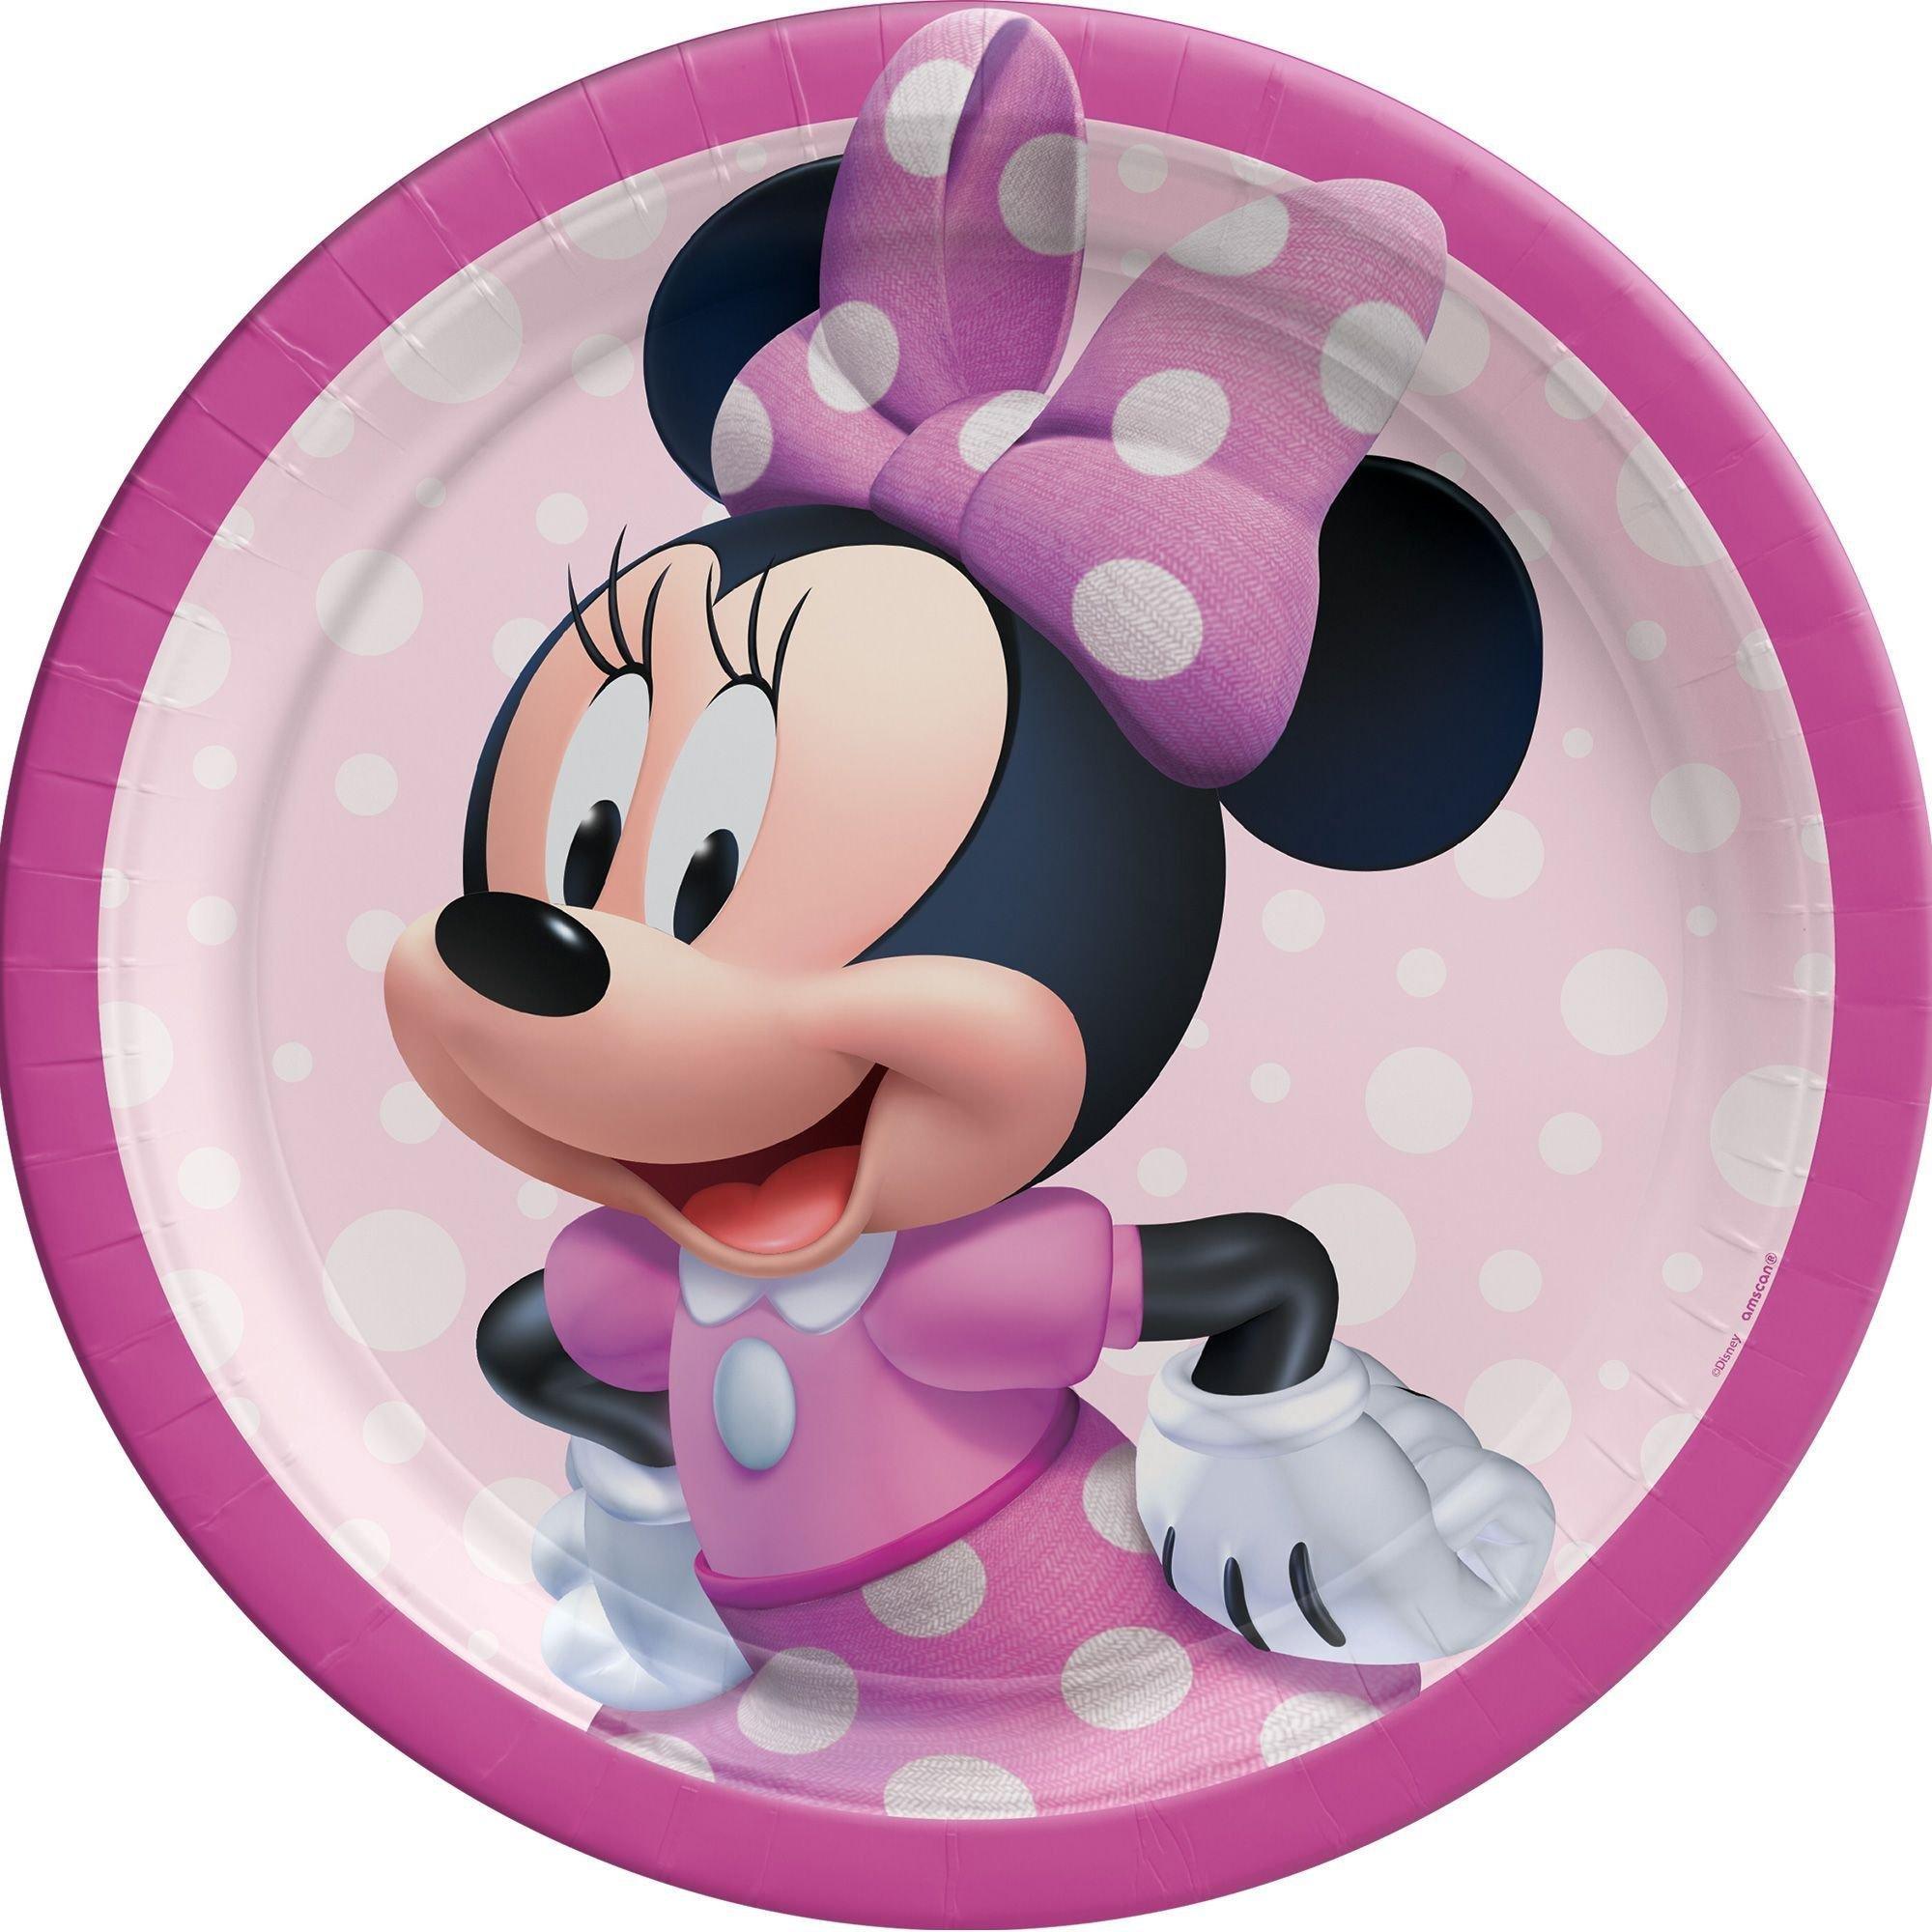 Minnie Mouse Forever Party Supplies Pack for 8 Guests - Kit Includes Plates, Napkins & Table Cover